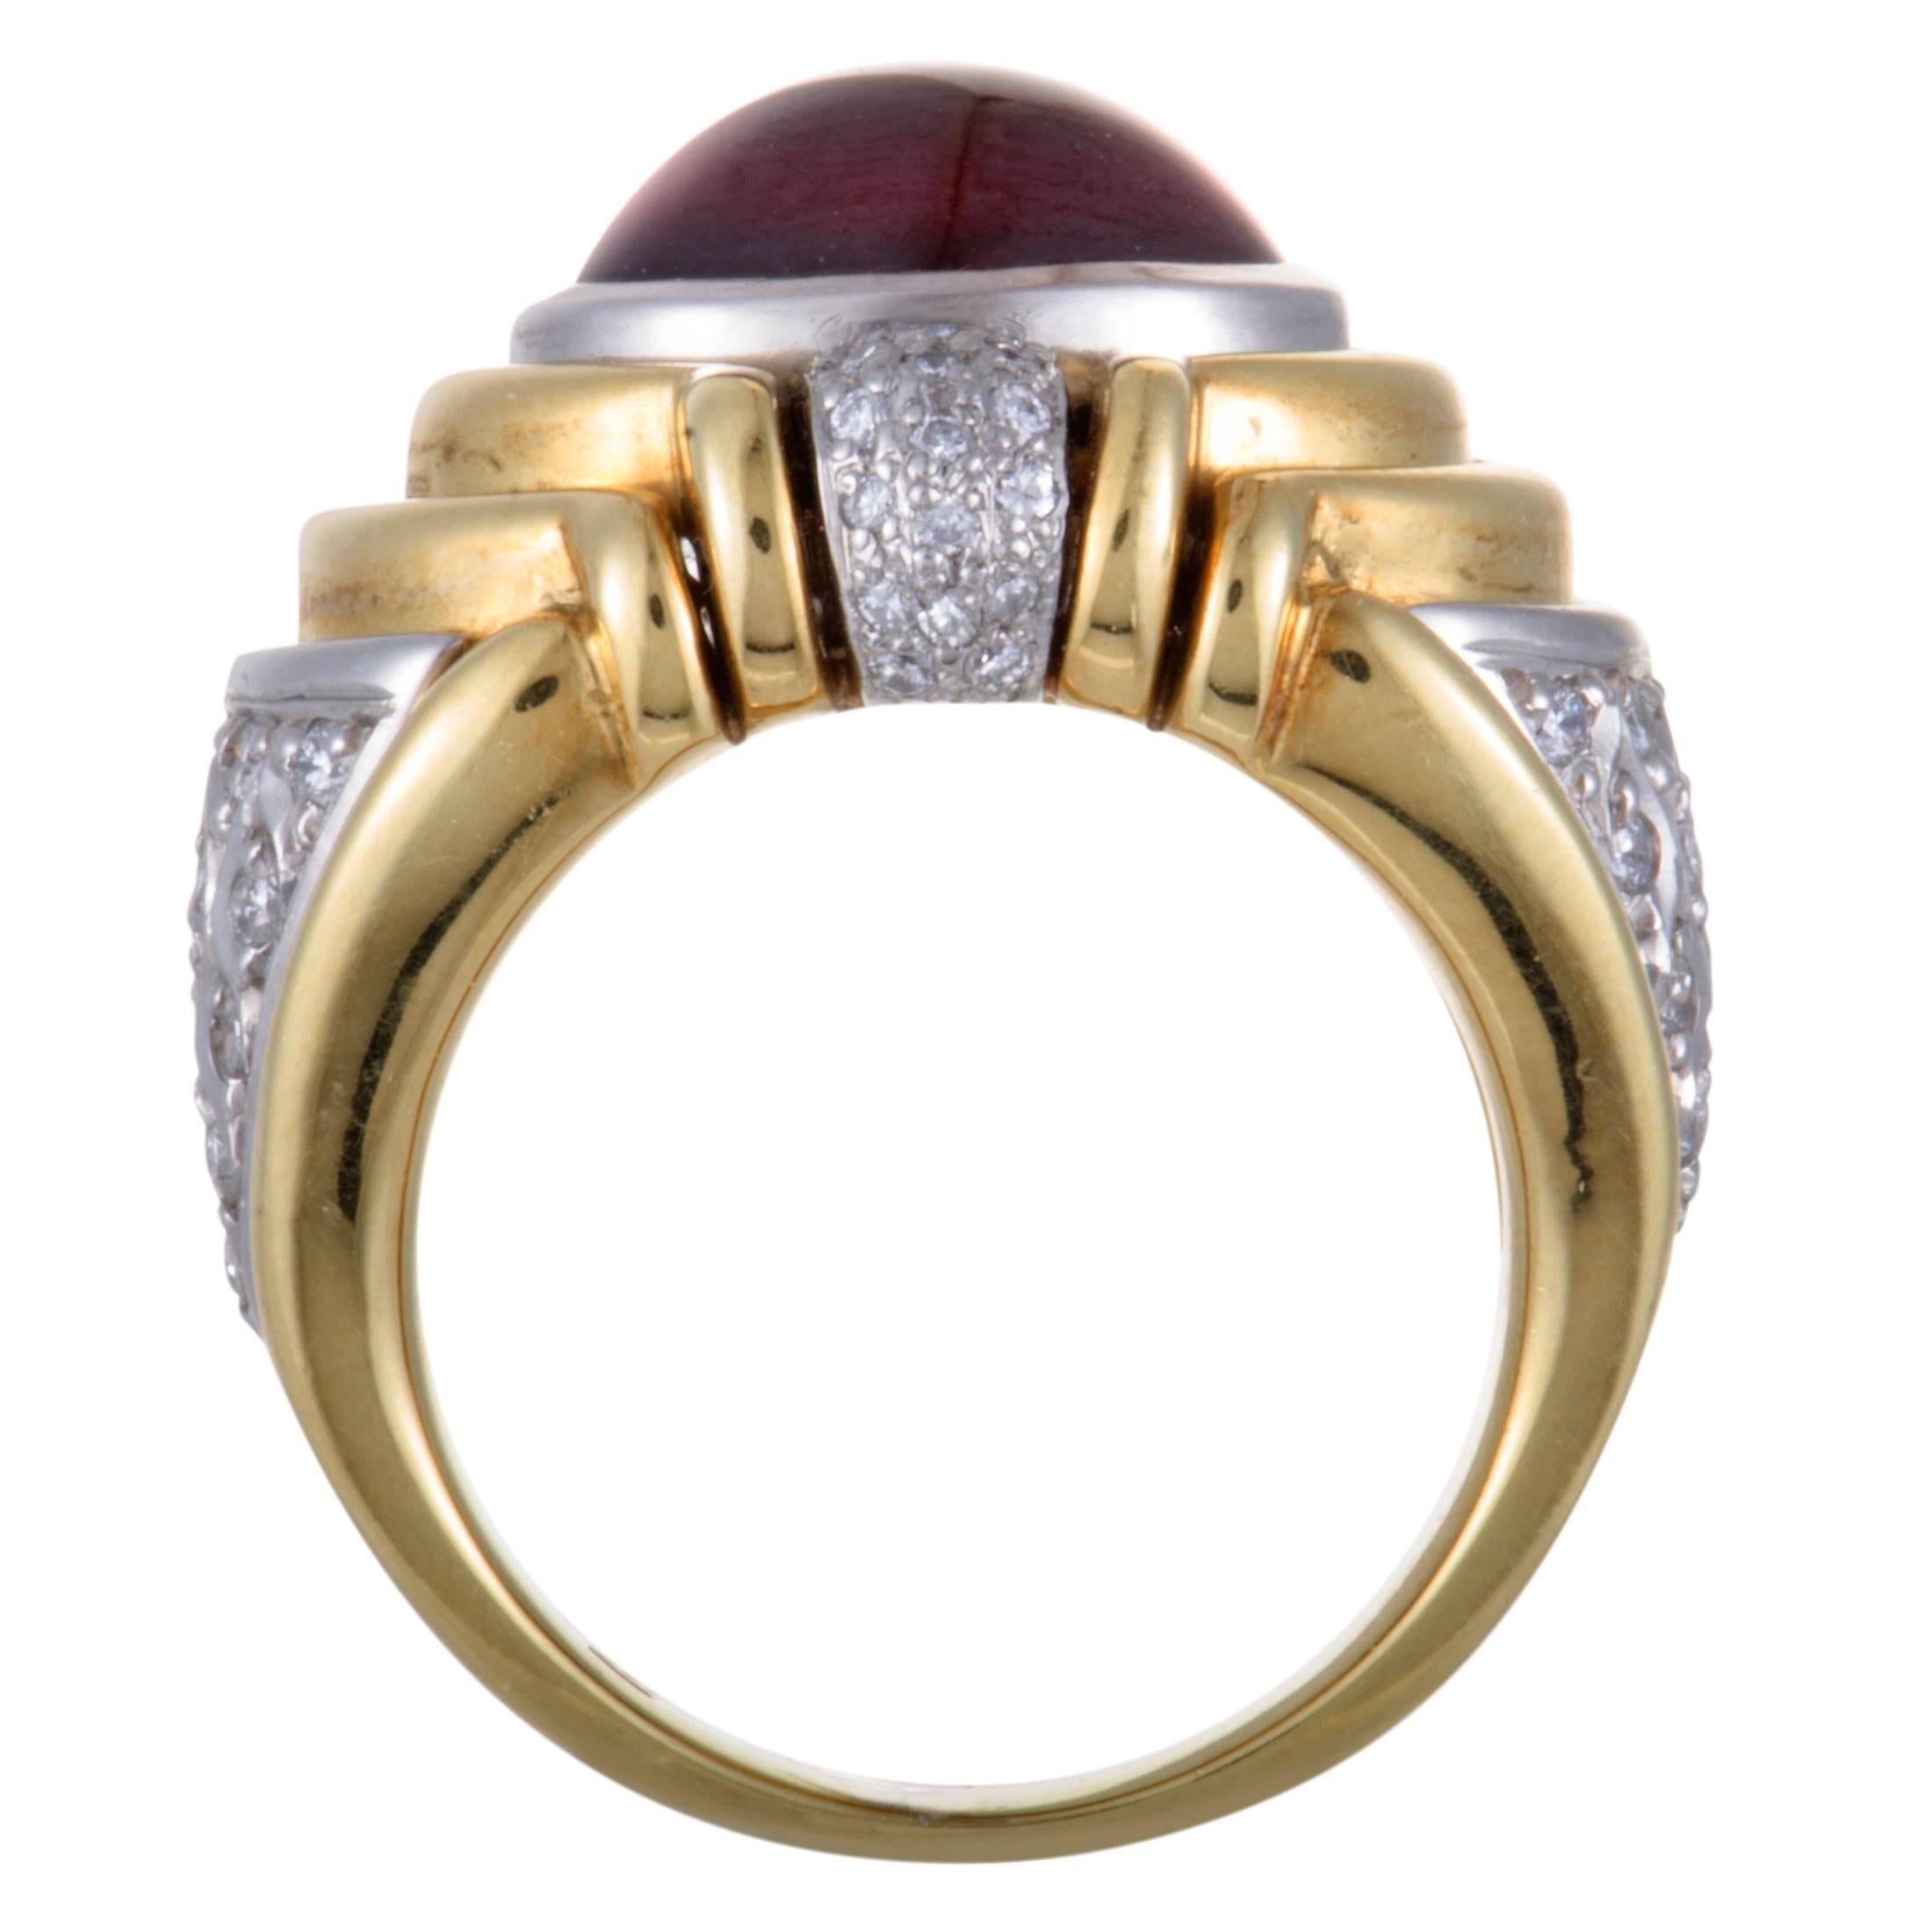 The ever-luxurious combination of classy 18K yellow gold and prestigious platinum is beautifully accentuated by an attractive garnet and a plethora of dazzling diamonds in this fabulous ring. The garnet weighs 6.52 carats and the diamonds amount to